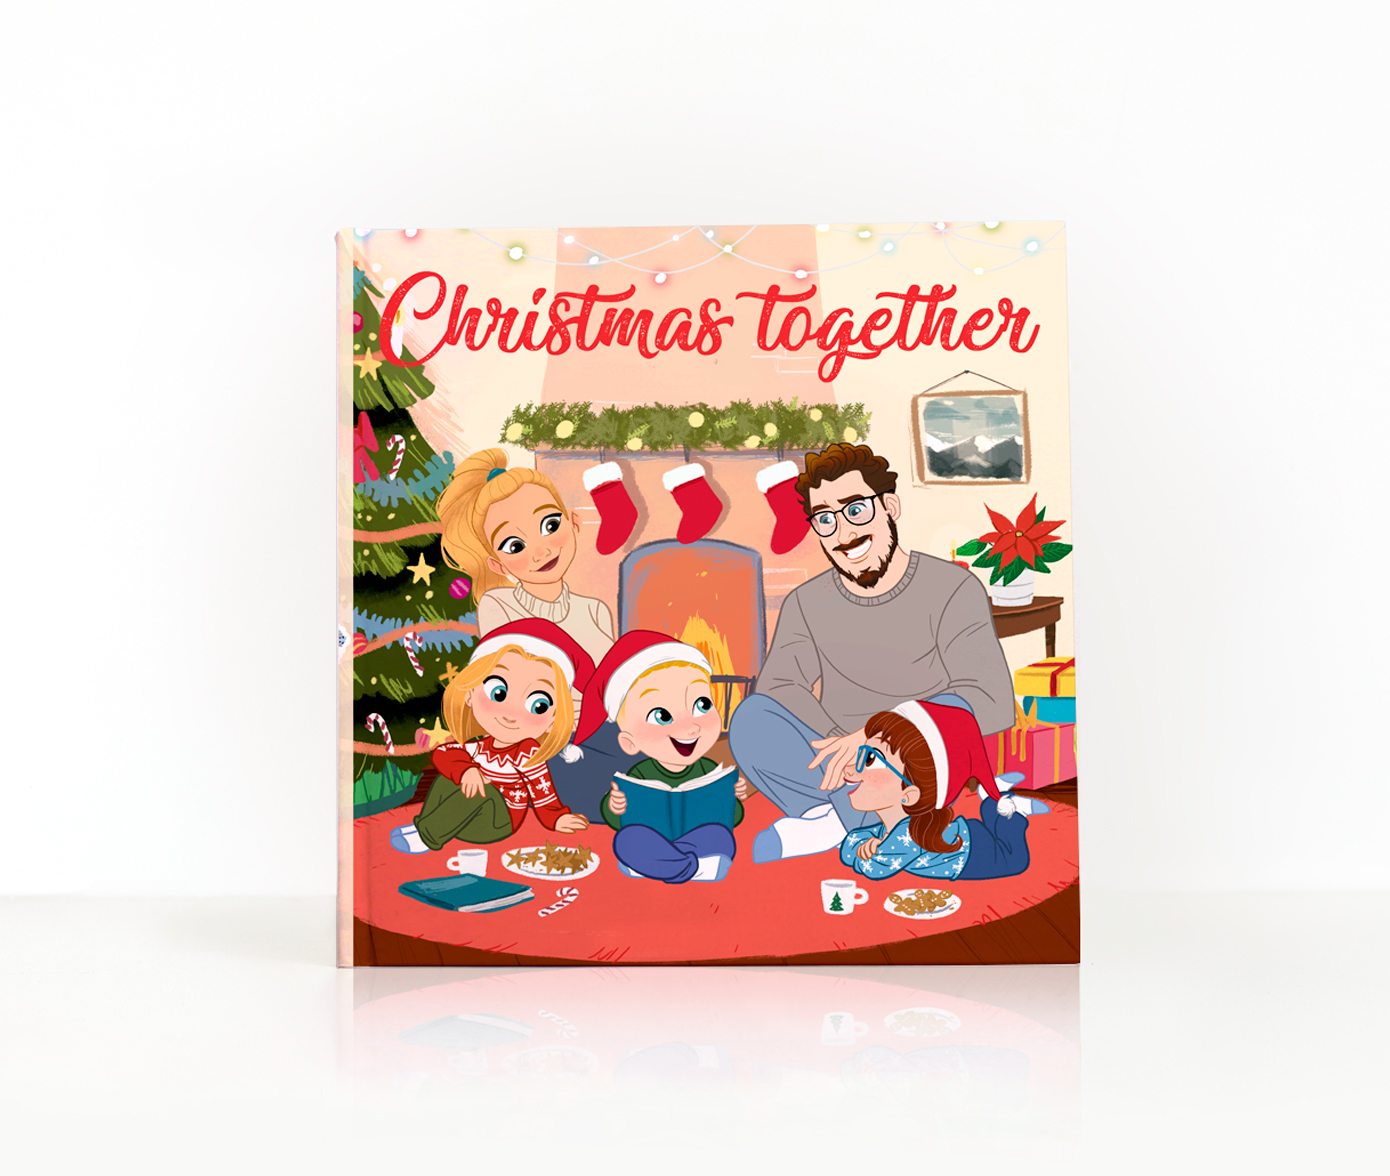 Personalized Christmas book